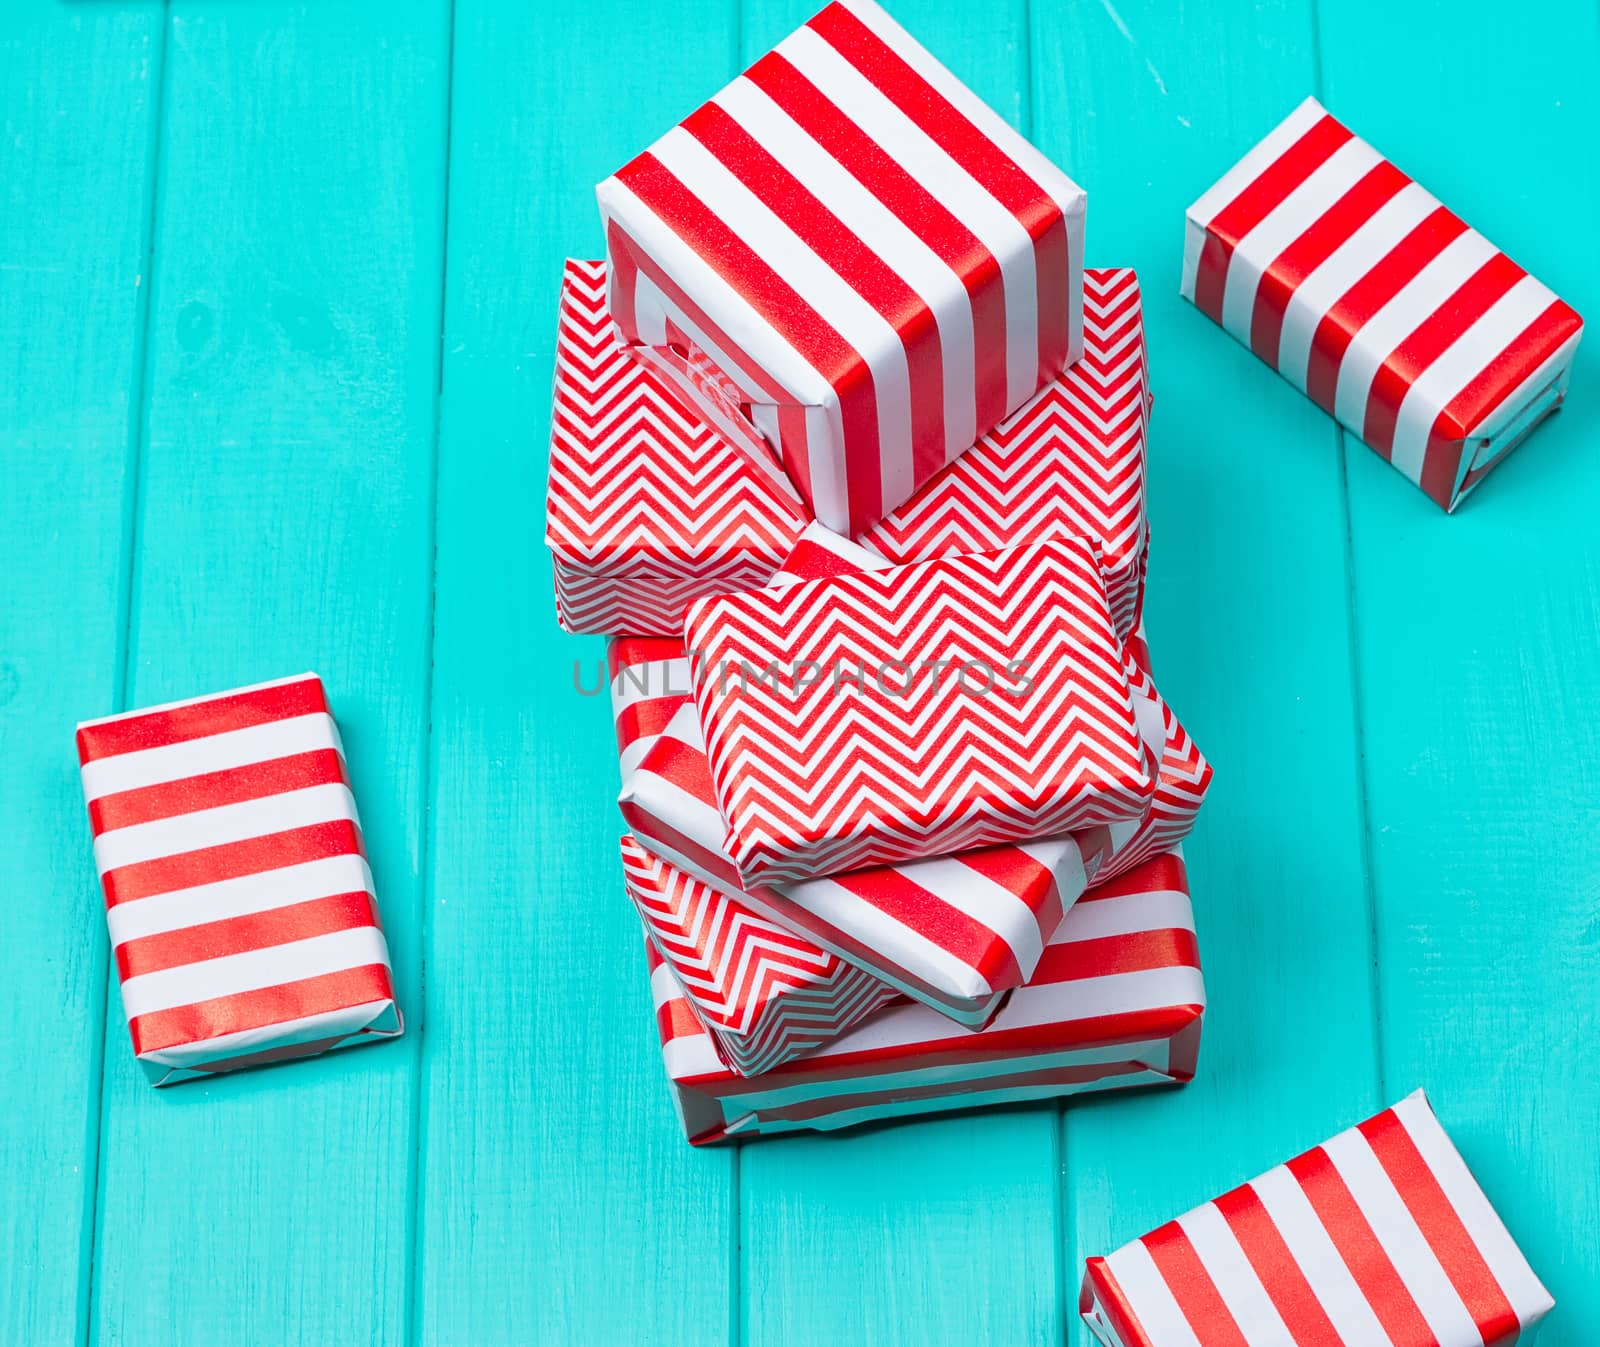 Many gifts in a red and white wrapper on a blue wooden background